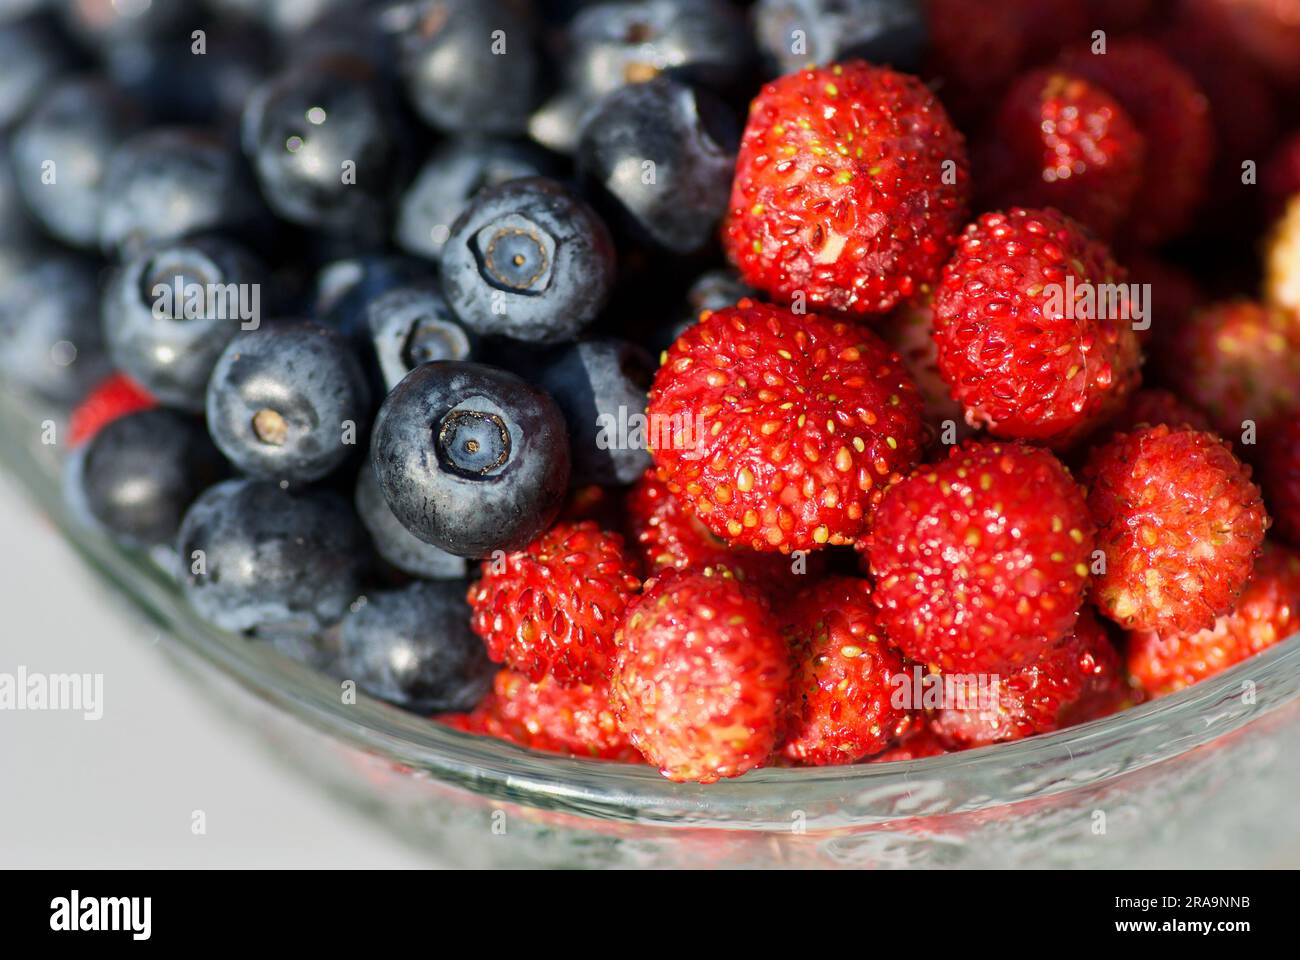 Glass bowl with fresh european blueberries and wild strawberries in summer. Stock Photo